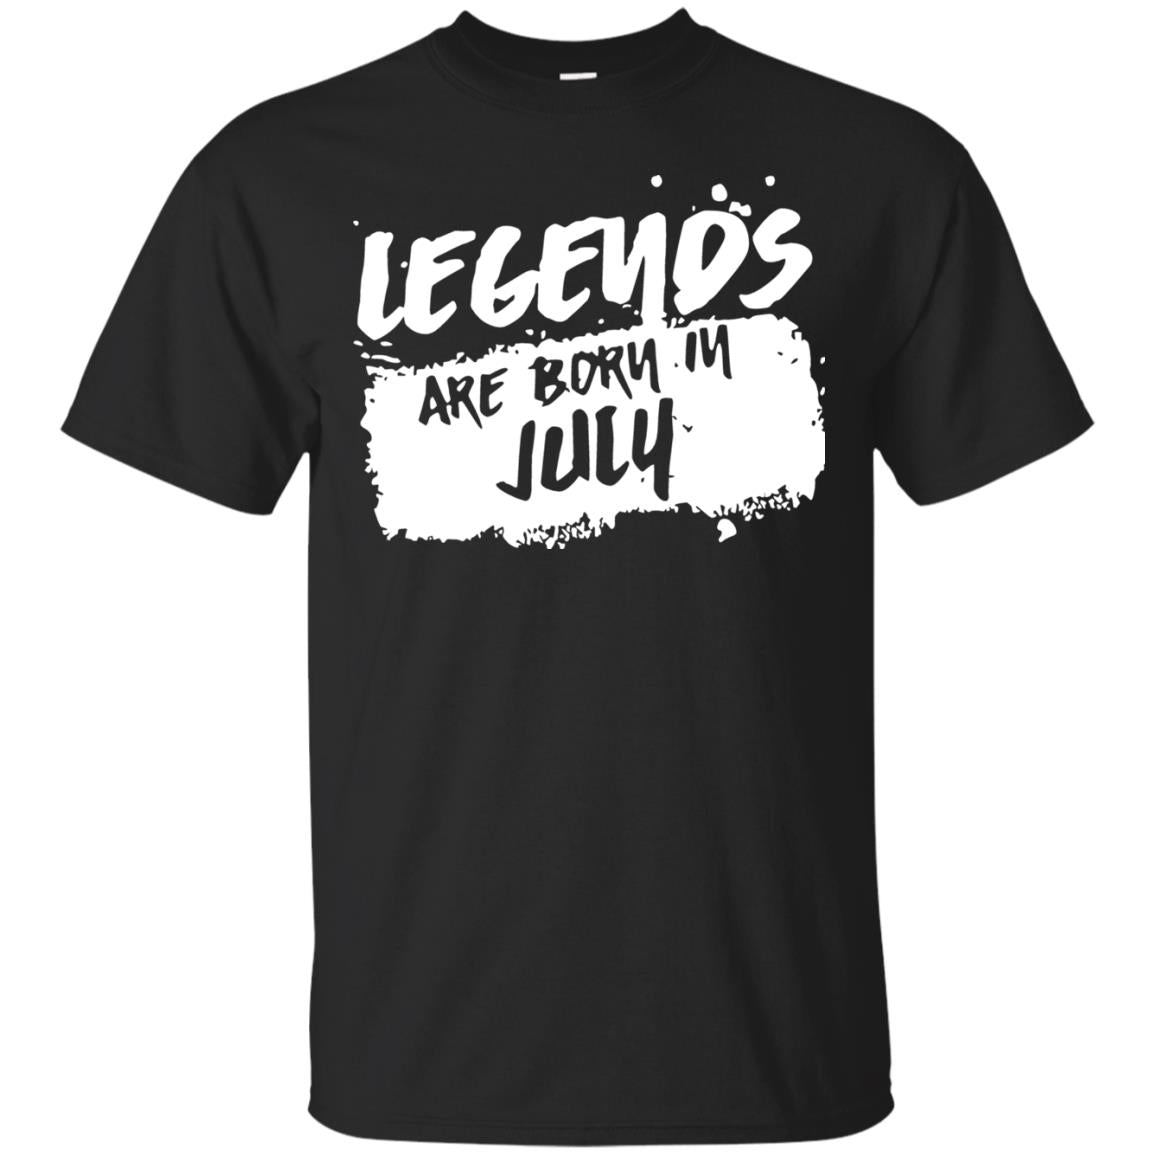 July Birthday Shirt Legends Are Born In July